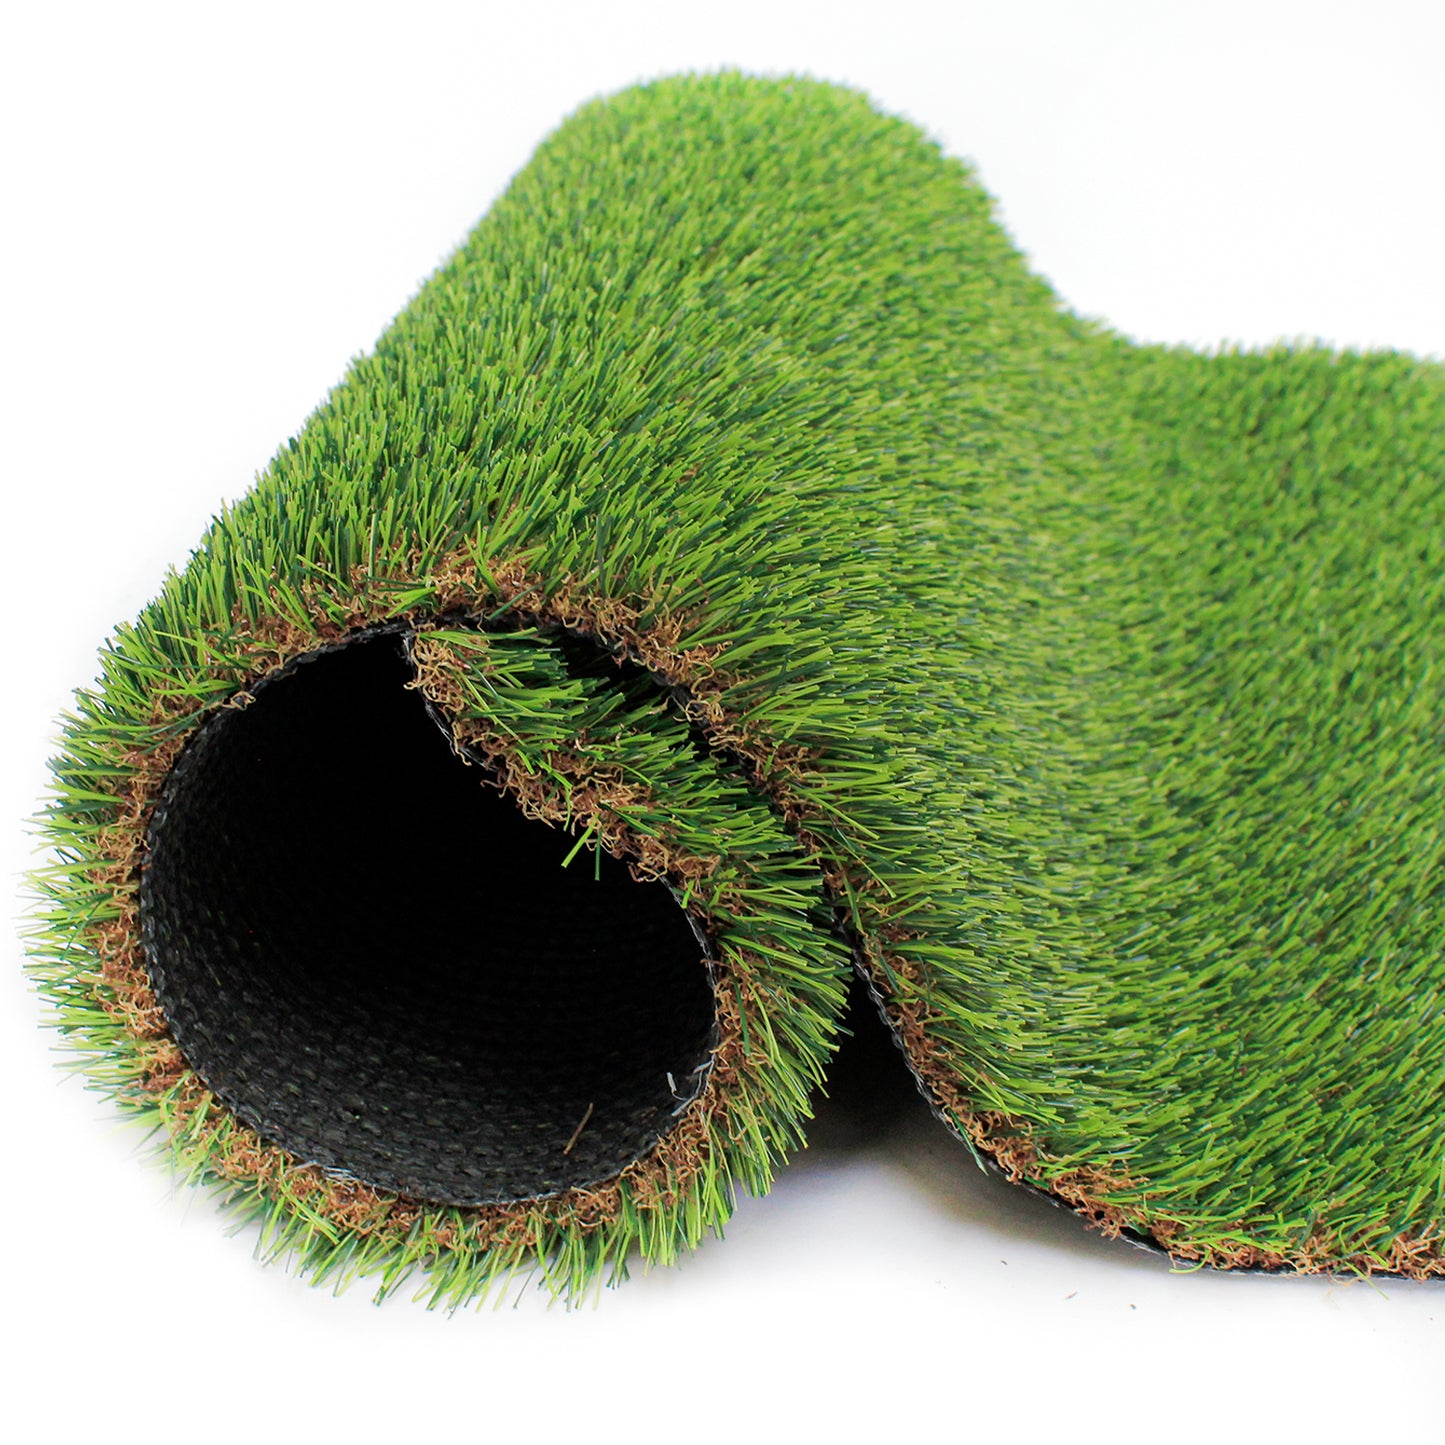 Pee Grass Turf for Dogs - Easy Drainage Mat - Multi-Size Options